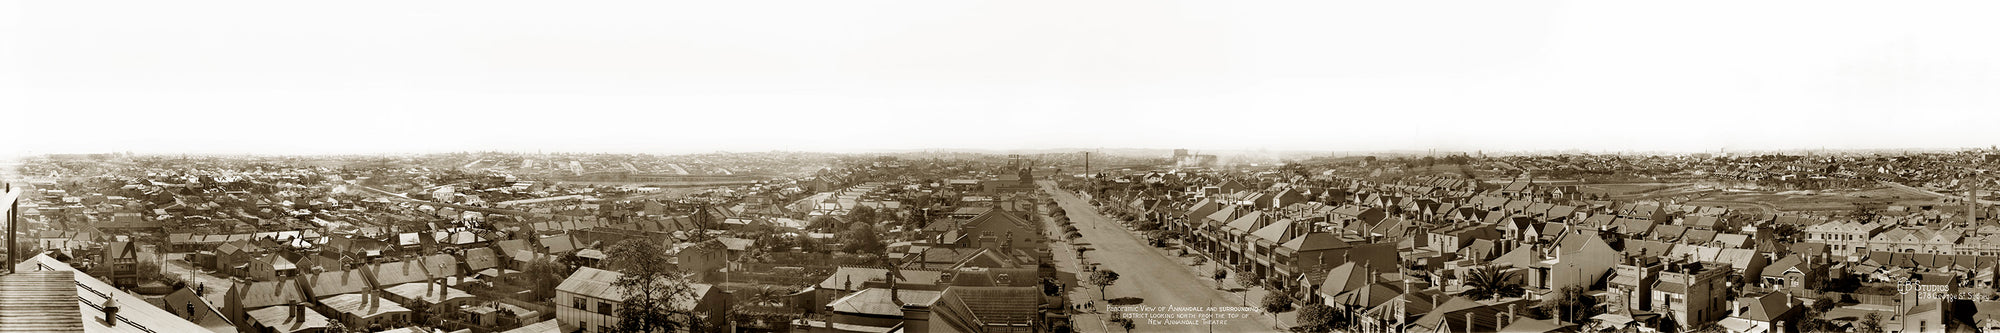 Panoramic View of Johnston Street Looking North, Annandale NSW Australia c.1928